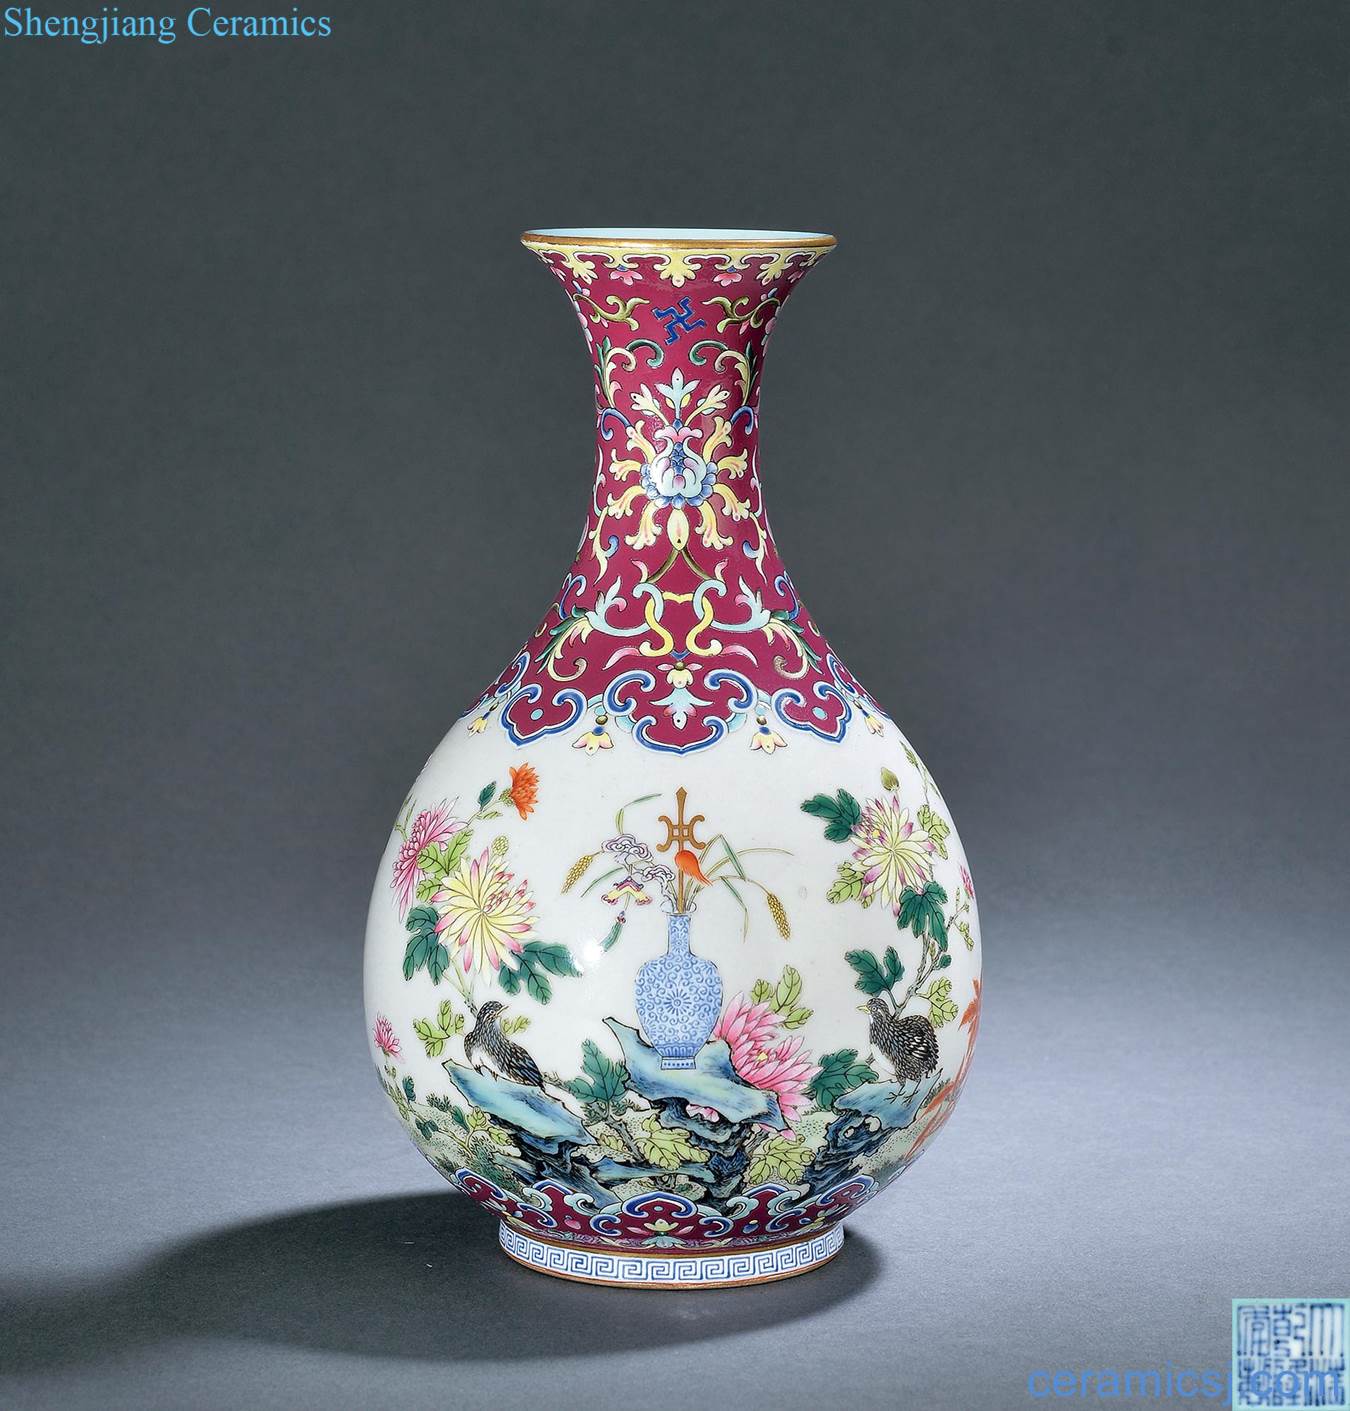 Qing carmine pastel medallion to live and work in peace and contentment okho spring bottle